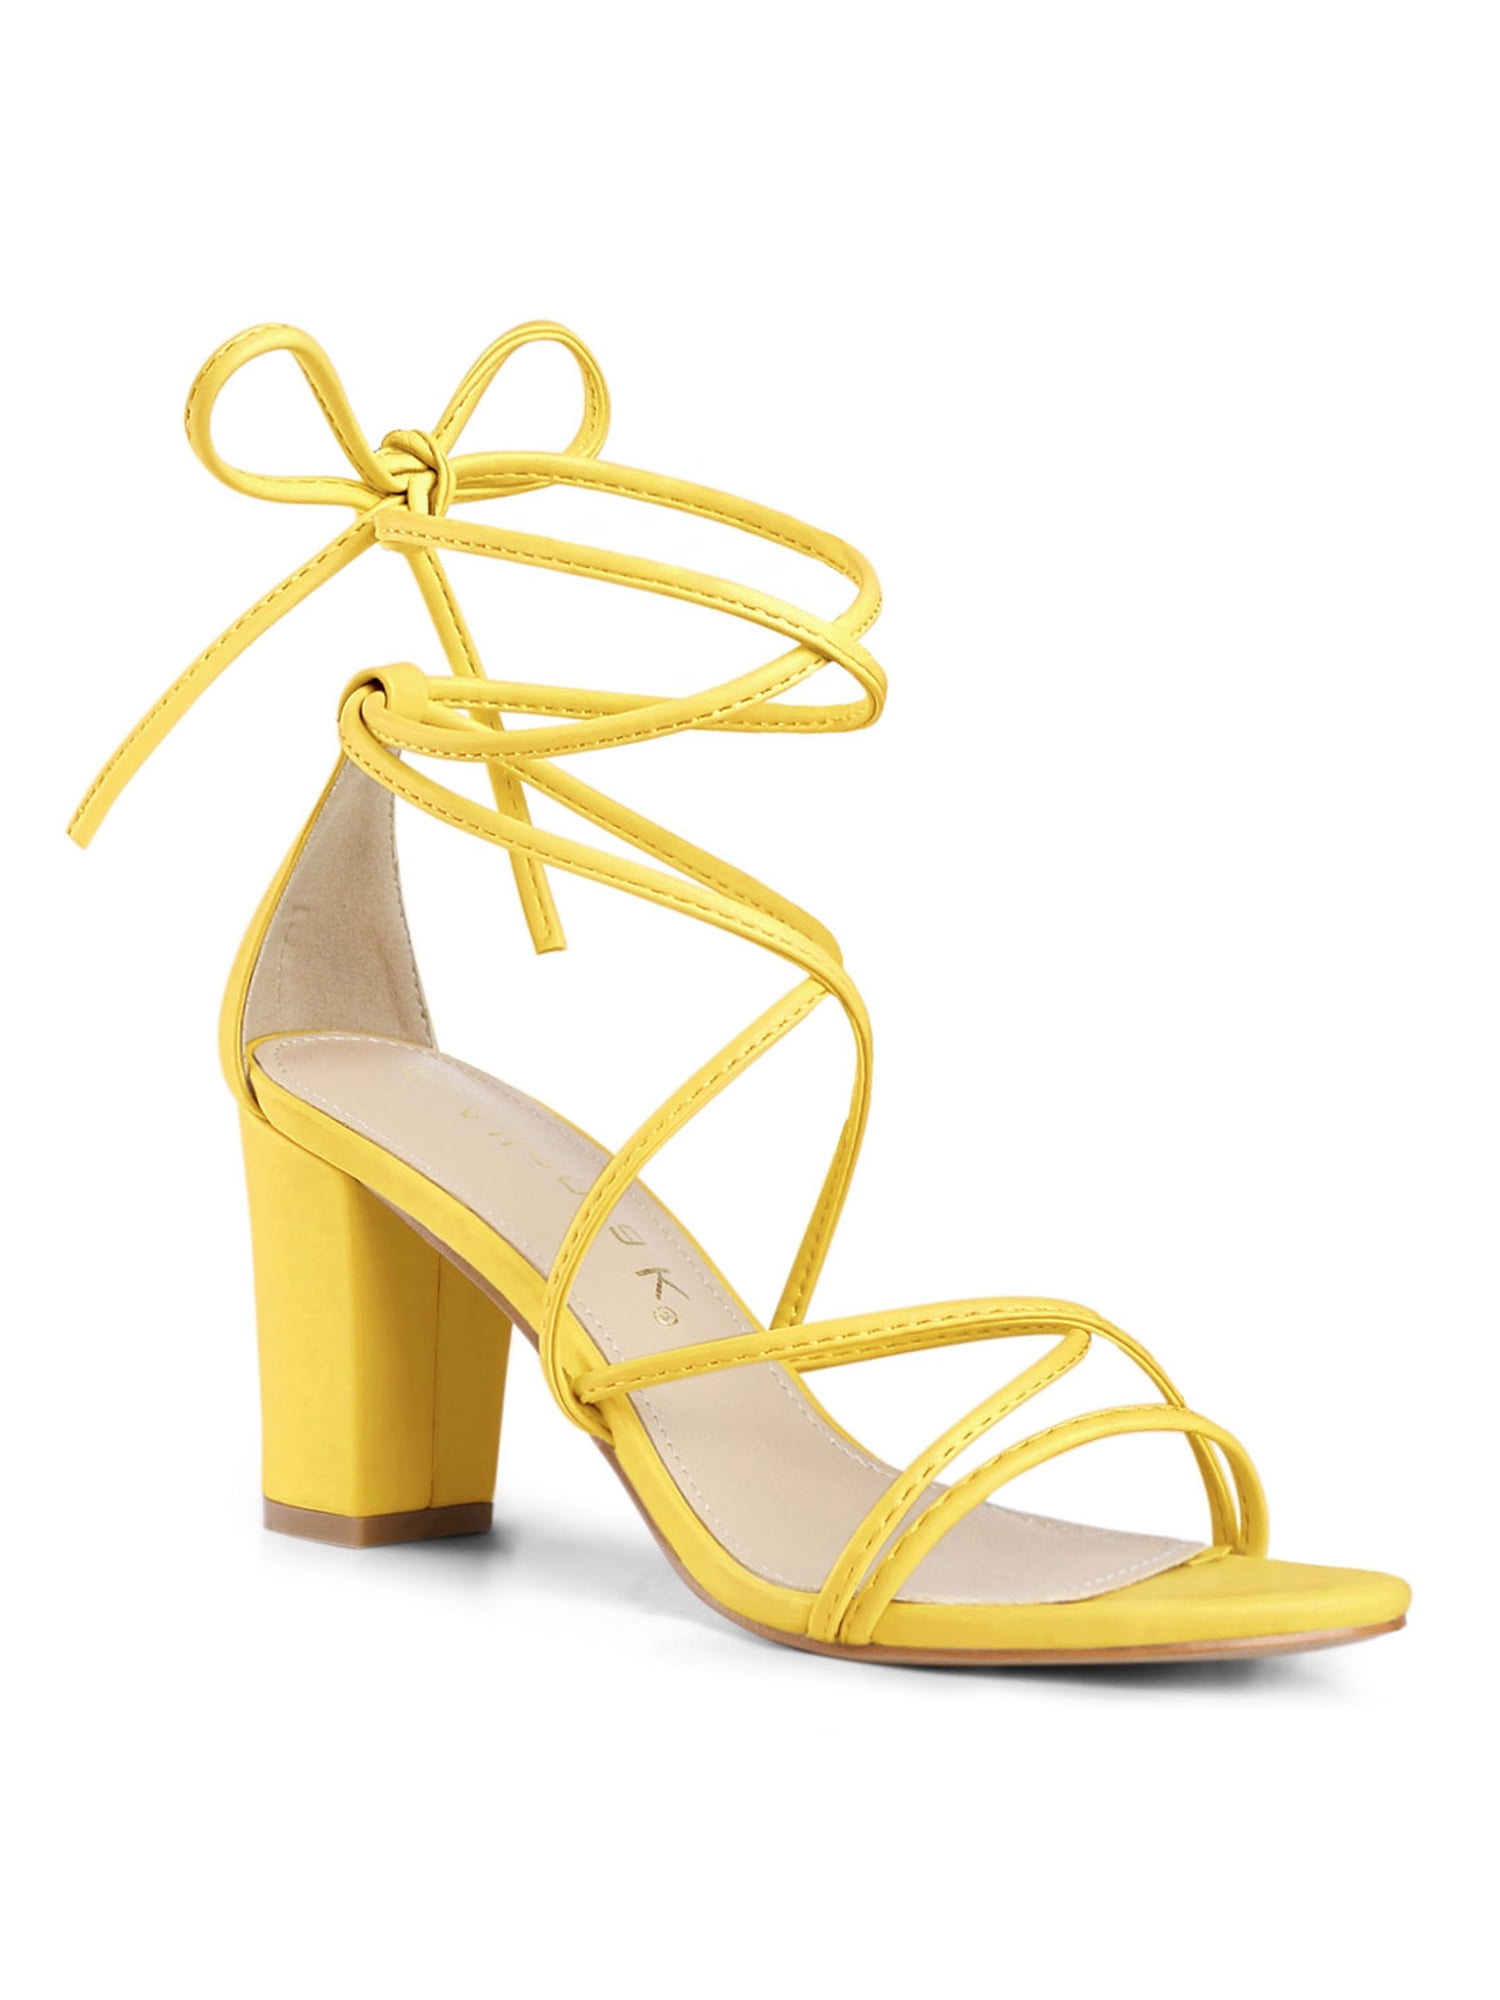 Pedro garcia Strapped High-Heeled Sandals multicolored elegant Shoes High-Heeled Sandals Strapped High-Heeled Sandals 